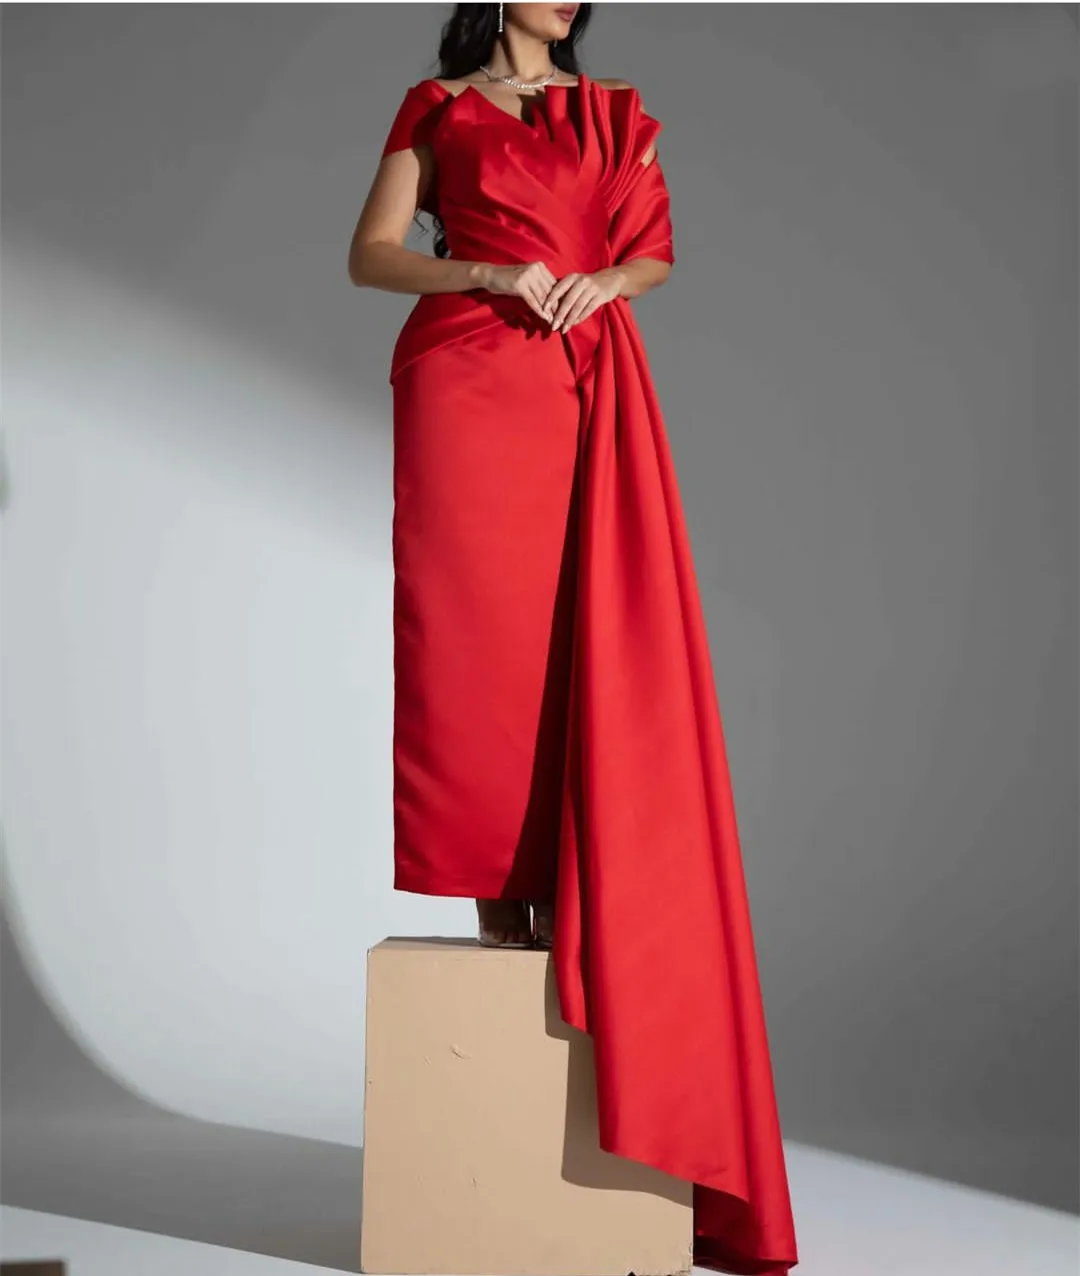 

Elegant Long Red Taffeta Evening Dresses With Side Train Sheath Scallope Prom Dress Party Gowns Robes de soirée for Women